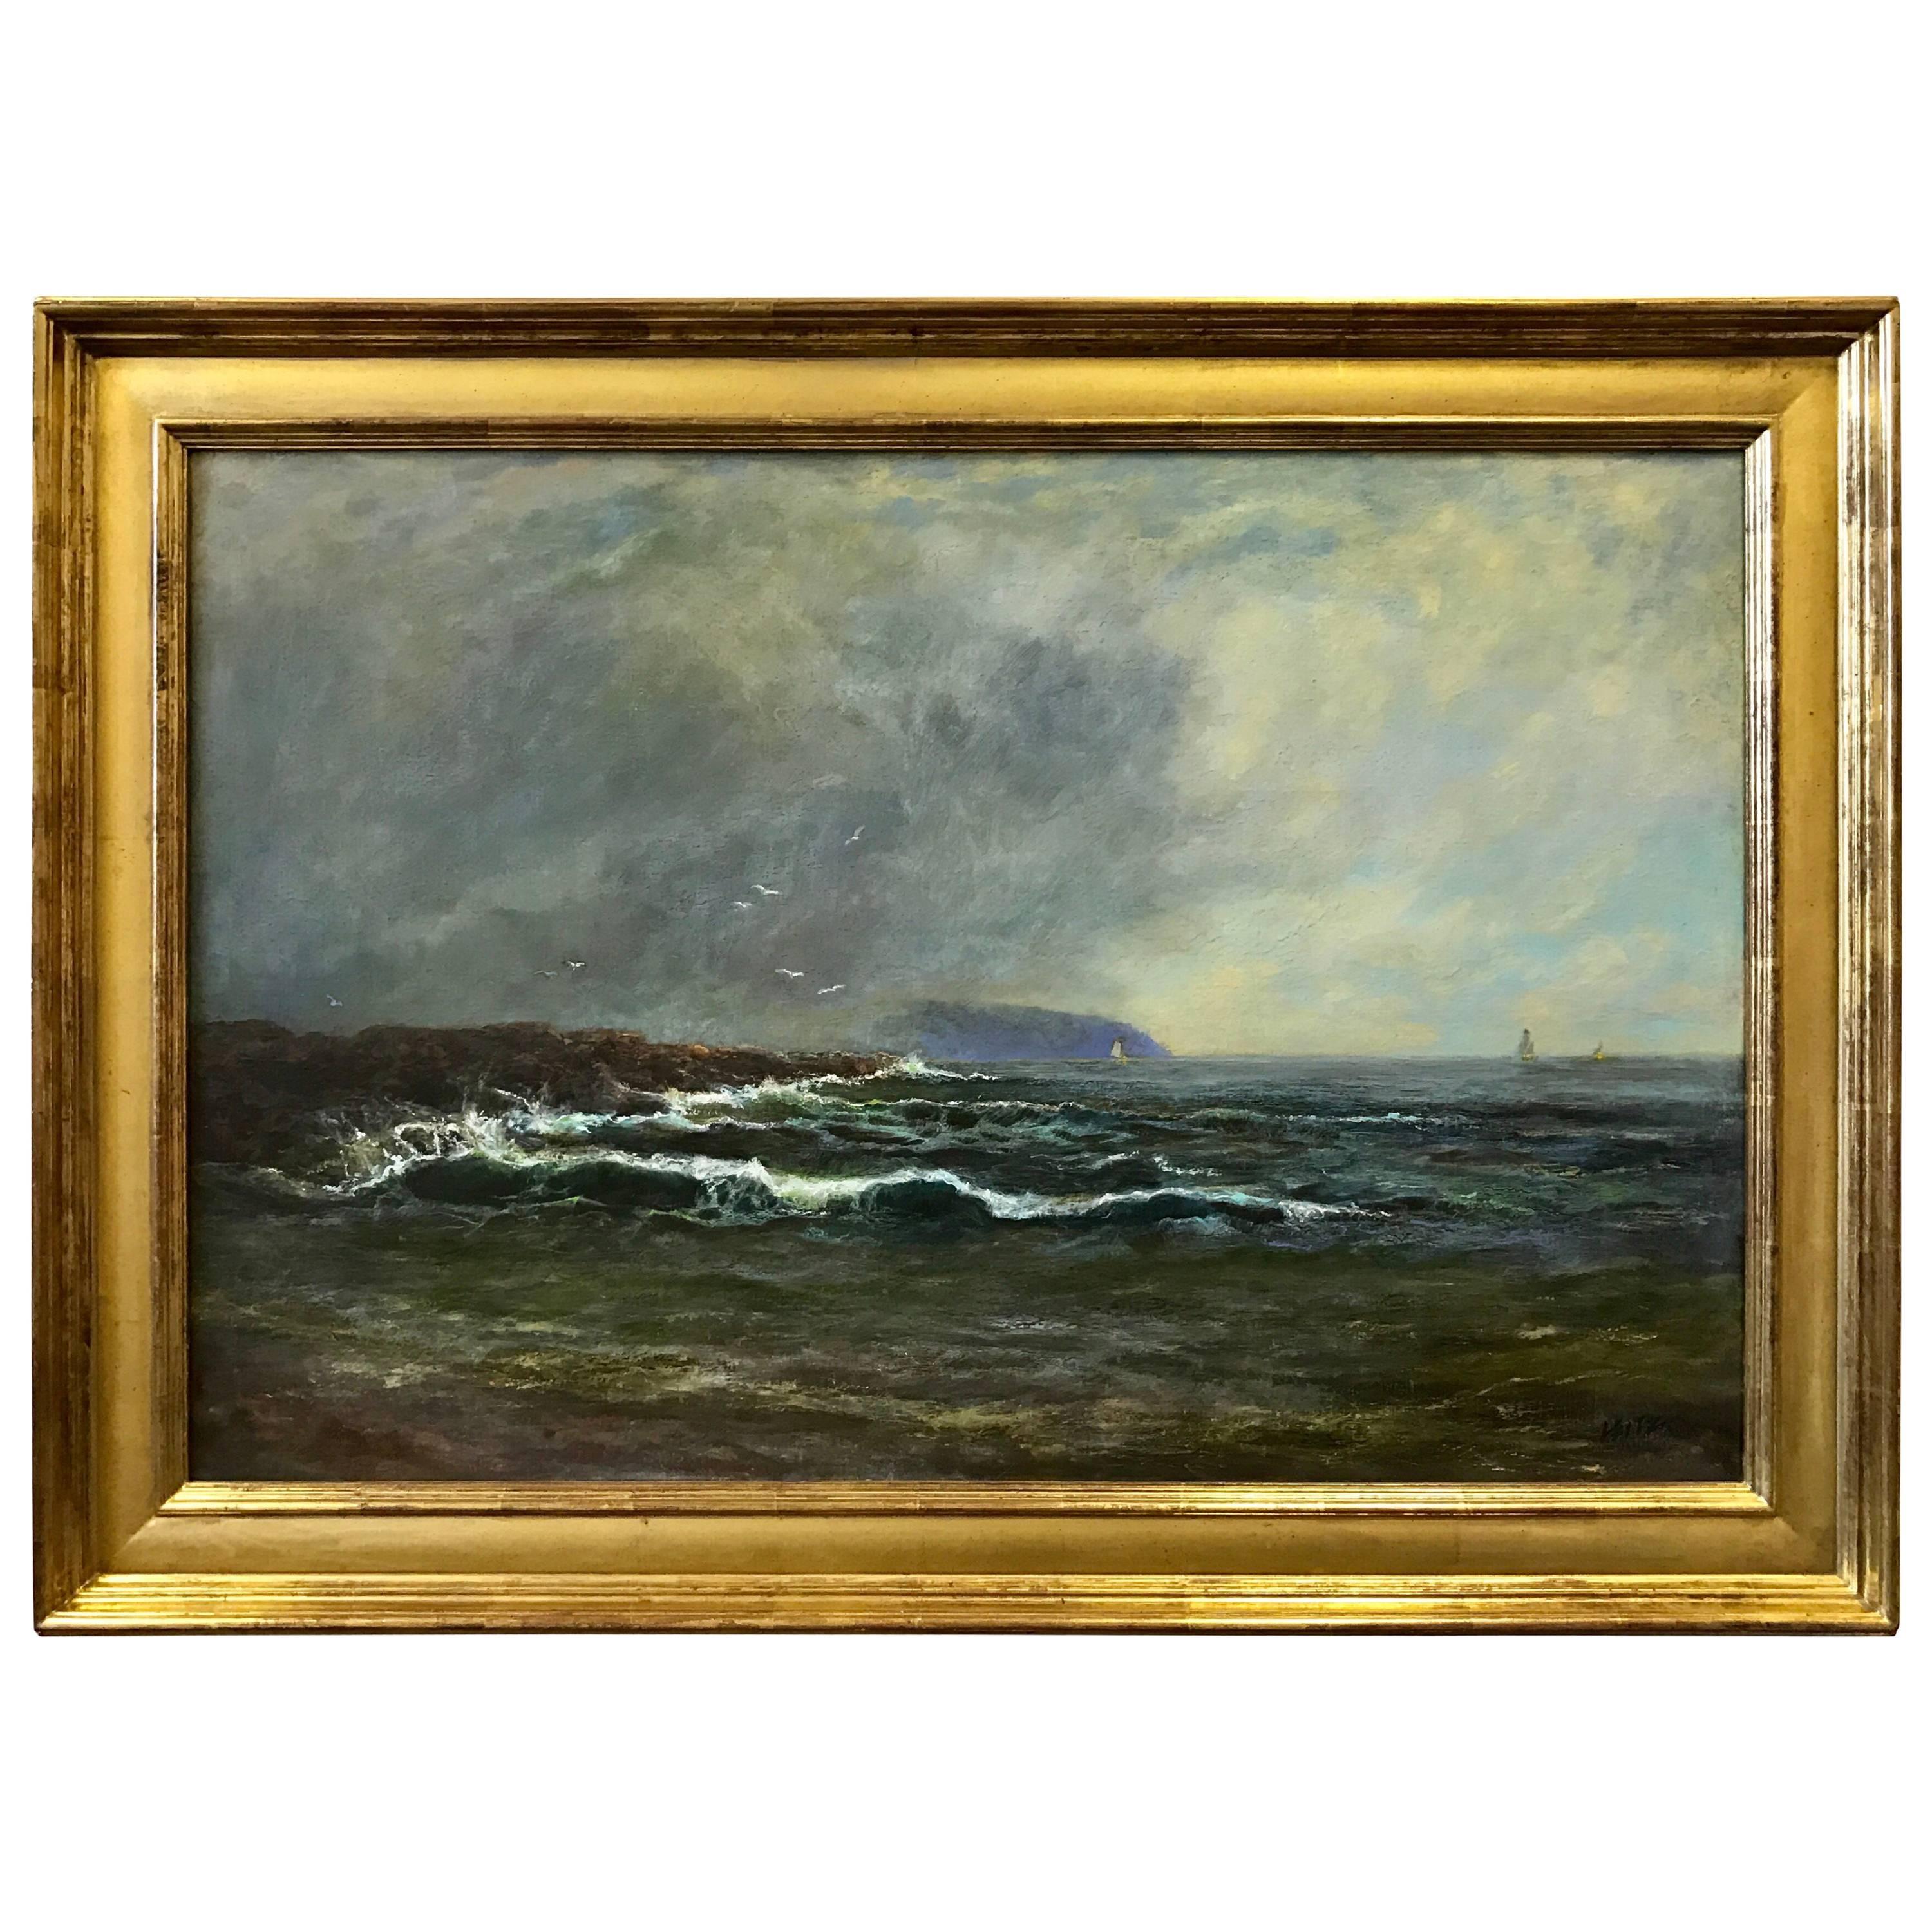 Jeffrey Leitz Signed Oil Painting Charles Island Squall Seascape Gold Frame